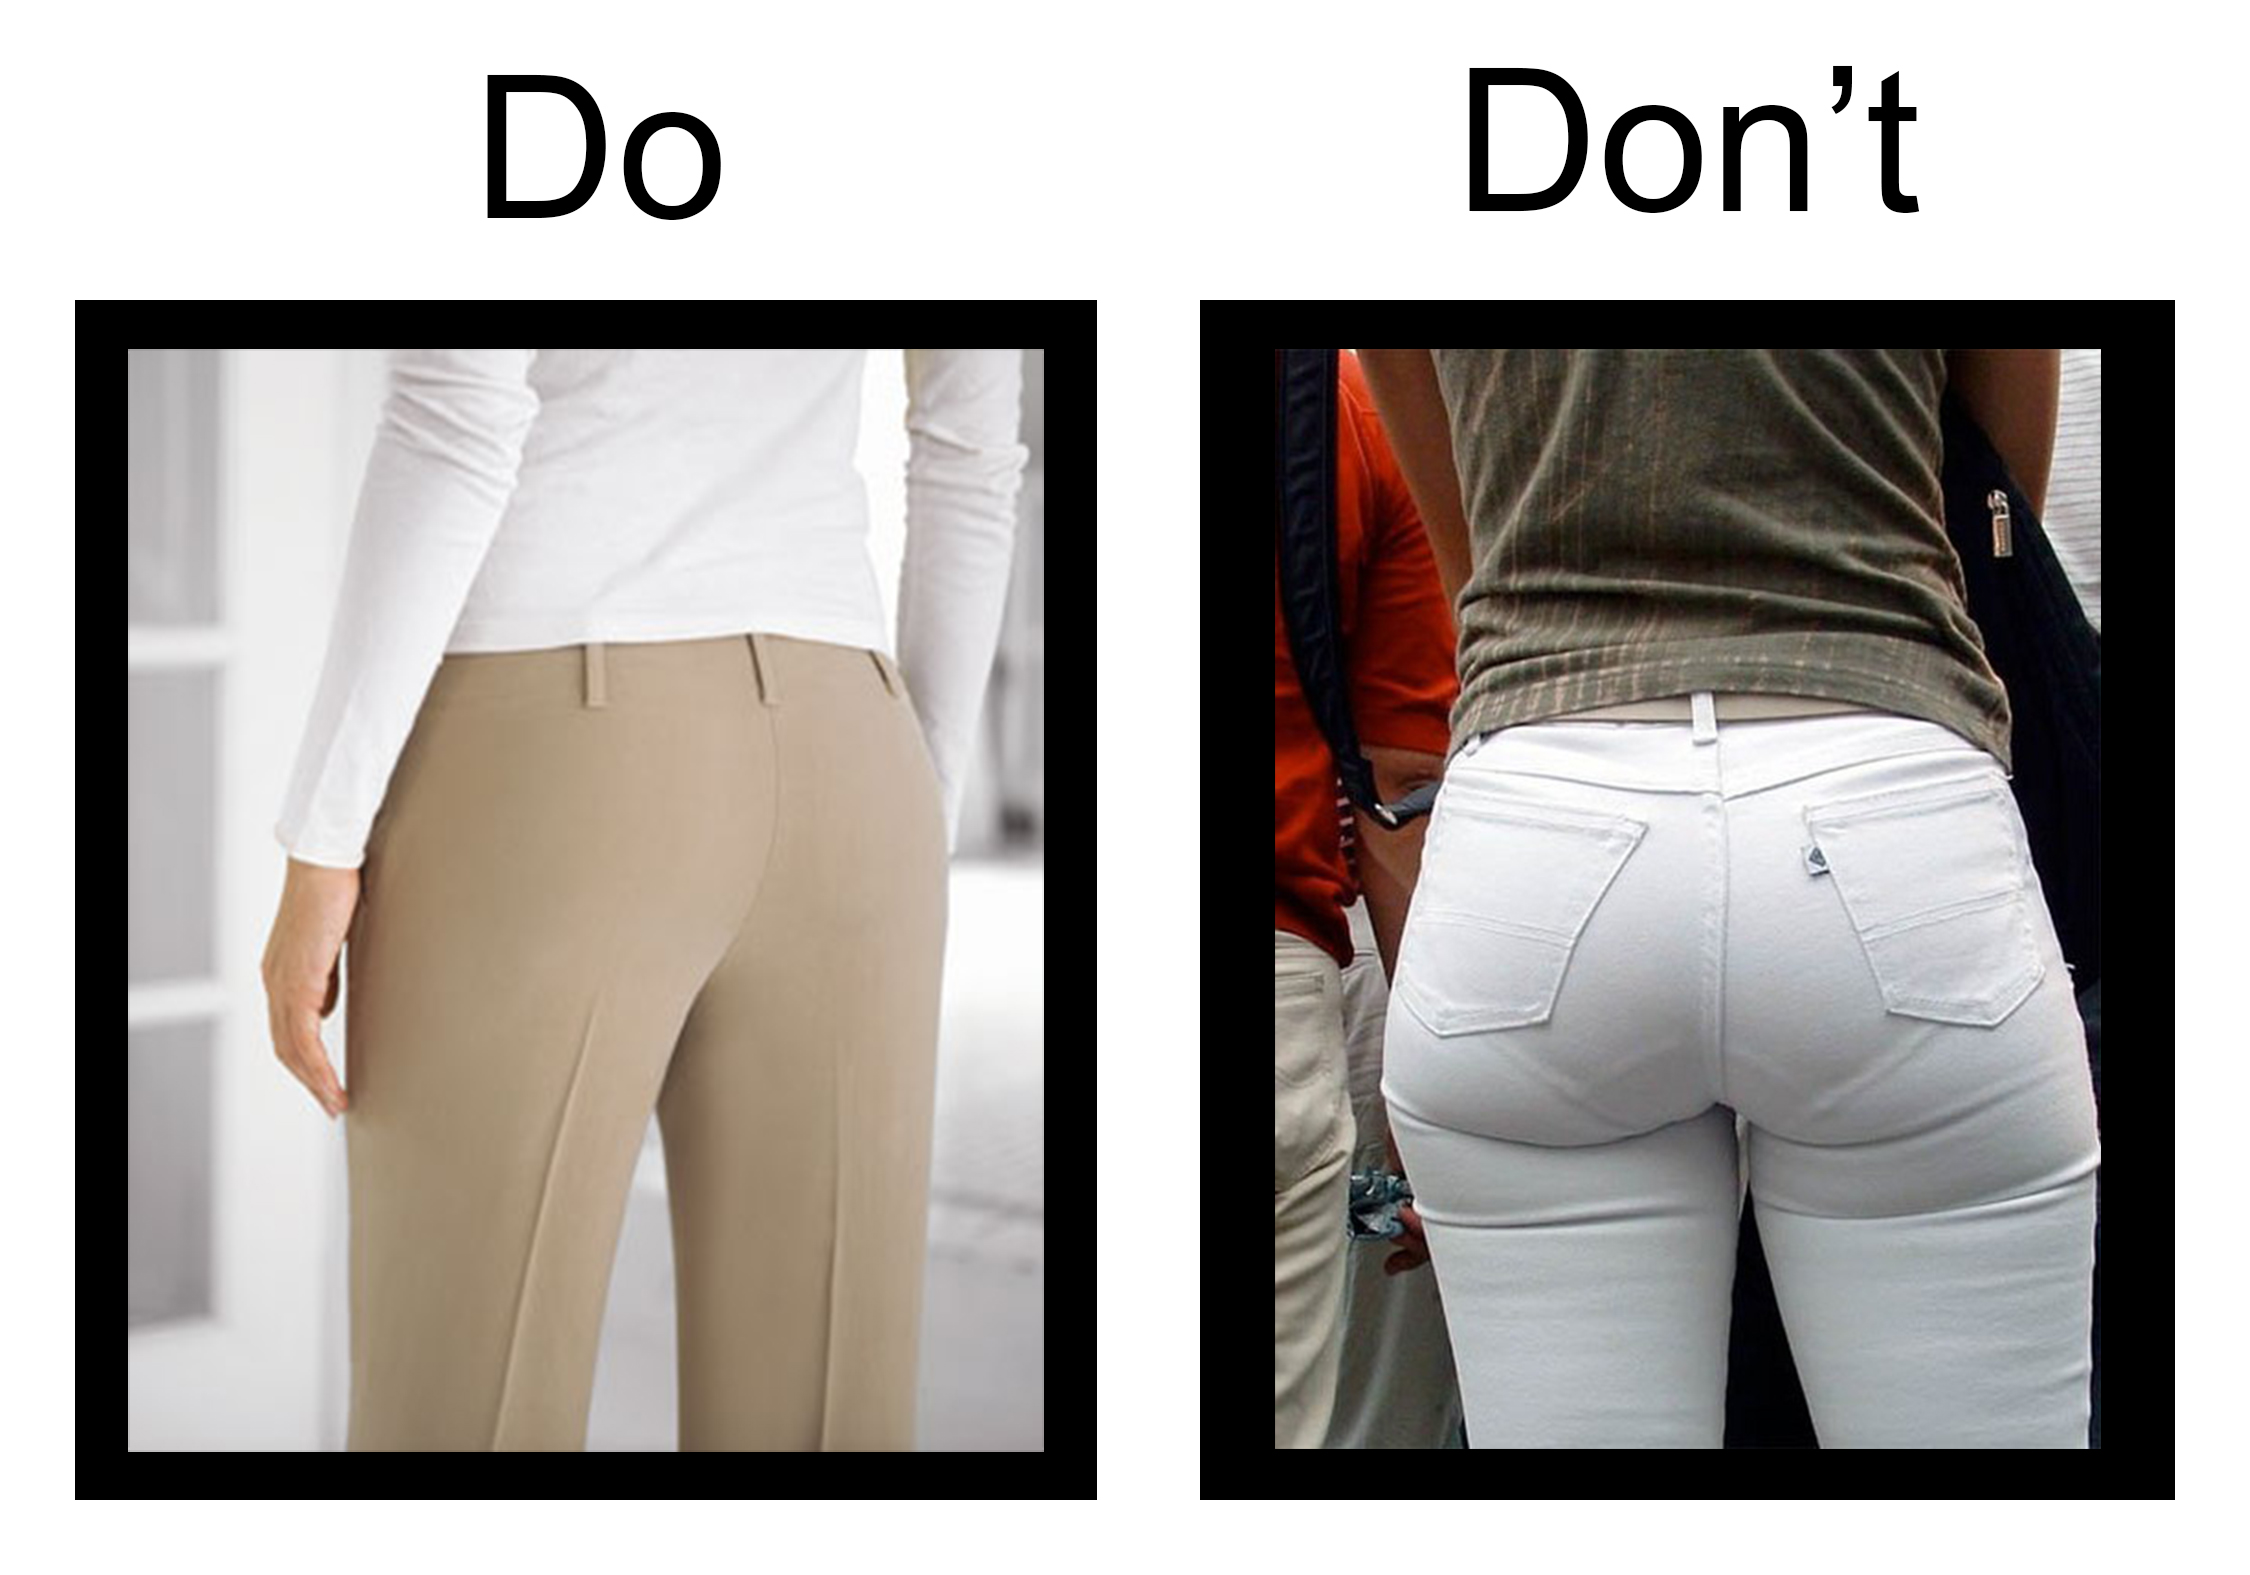 Ladies…Stop Showing Your Panty Line!